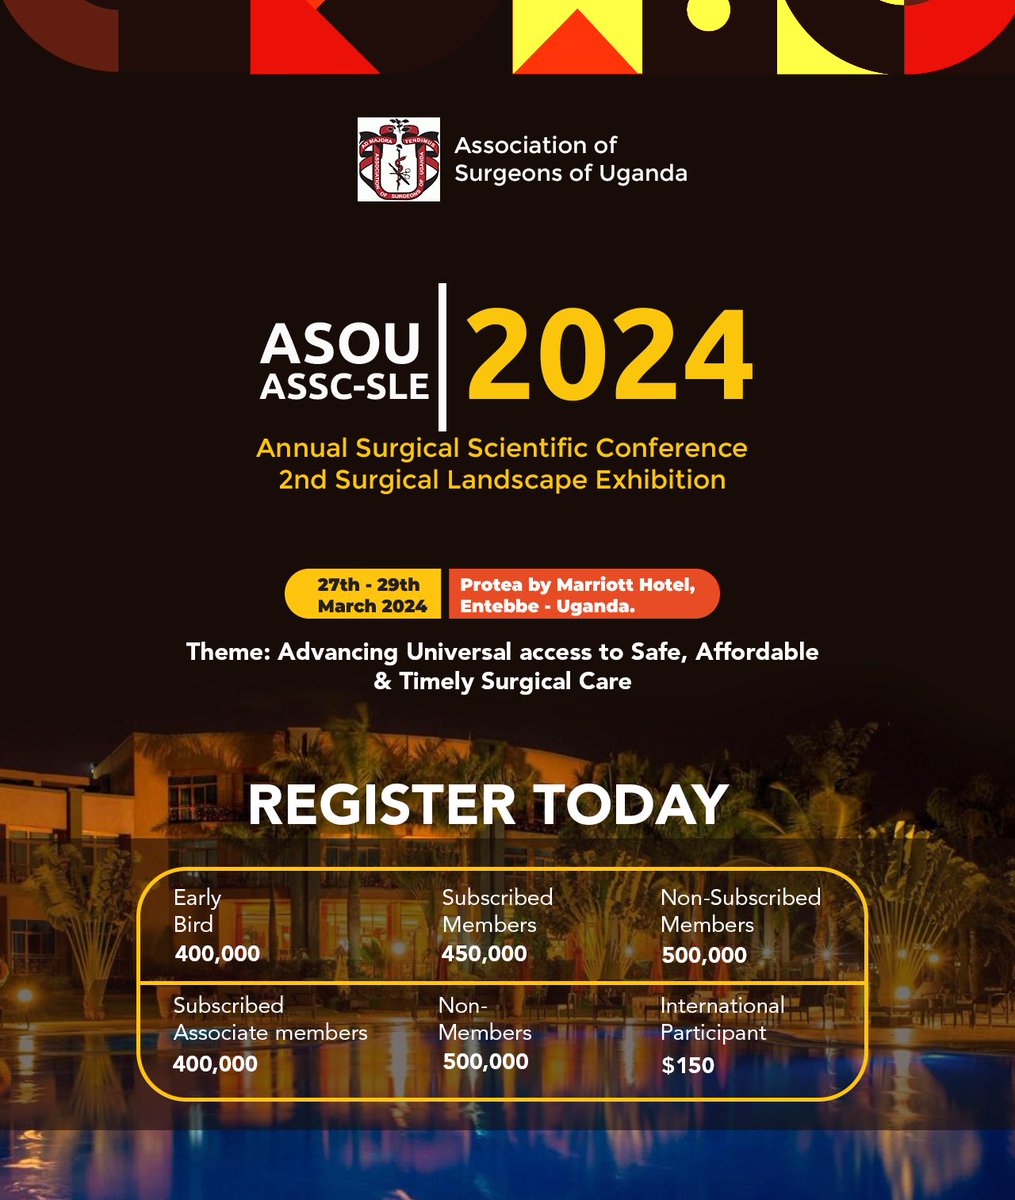 Are you a global surgeon from any part of the world? Be a part of our Annual Surgical Scientific Conference and Surgical Landscape Exhibition from 27th - 29th March 2024 at Protea by Marriott Hotel in Entebbe, Uganda. Register today. tinyurl.com/MedAll-ASOU24 #GlobalSurgery